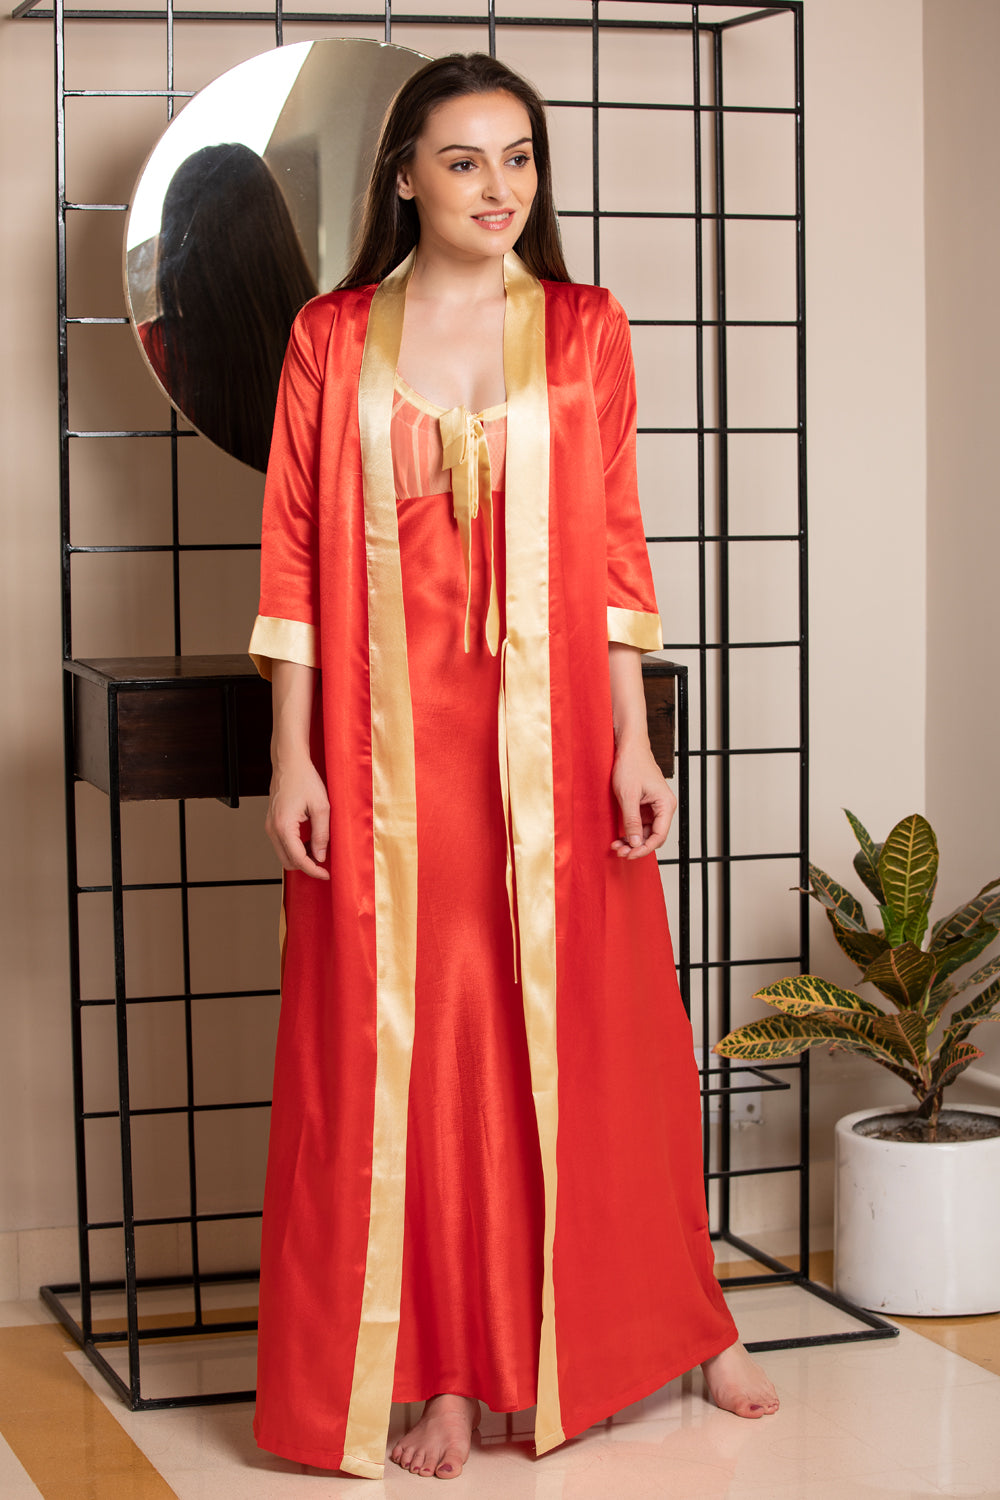 Red Satin Nightgown set - Private Lives